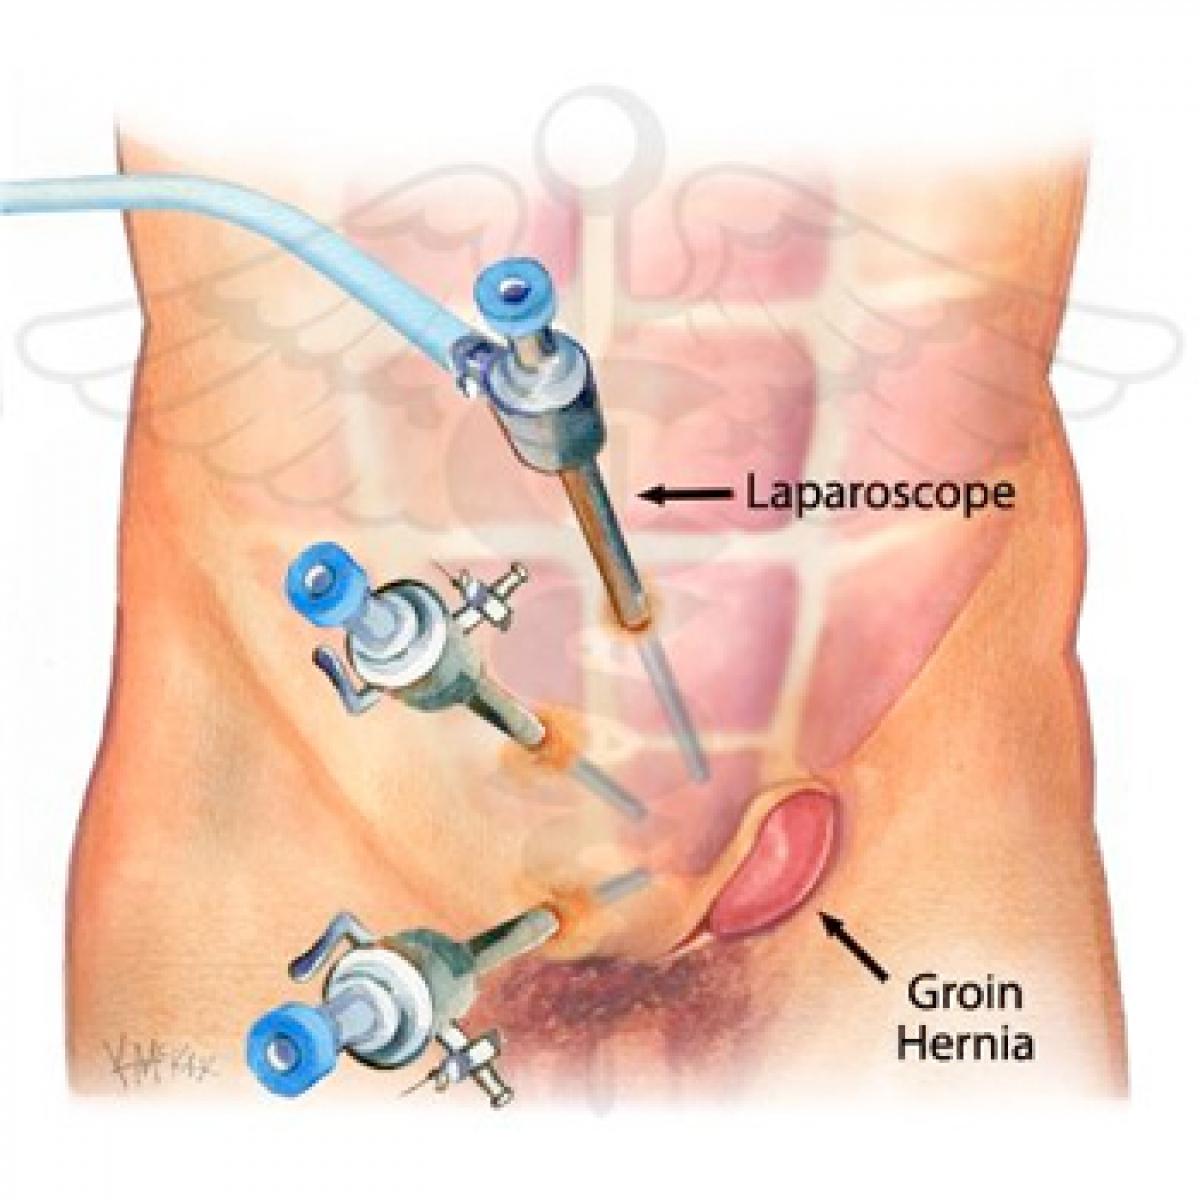 Hernia can be fixed by a small operation